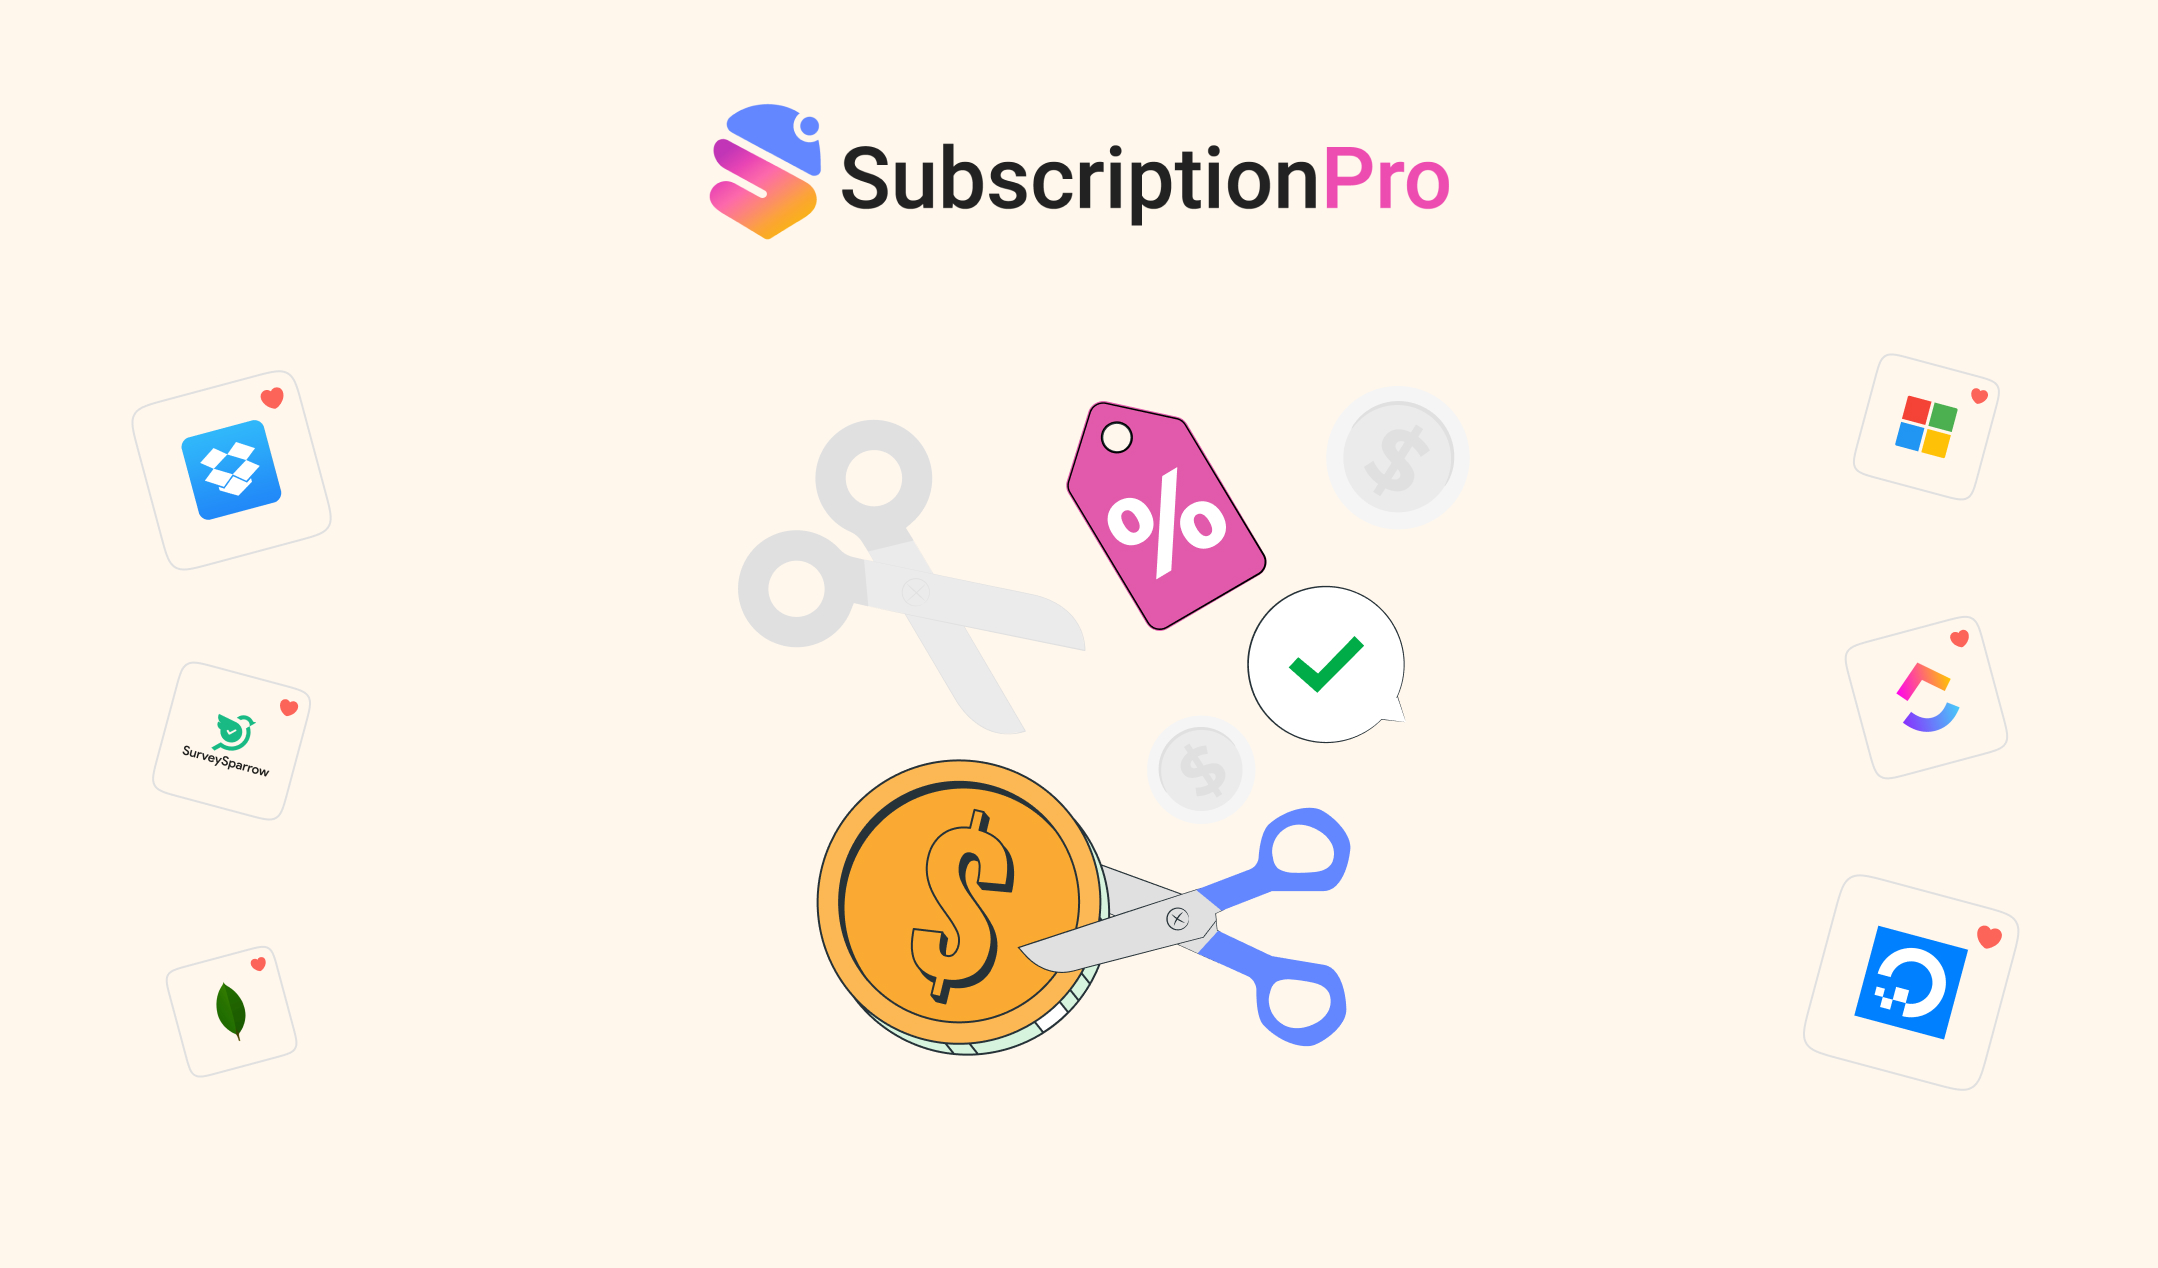 Saving Smart: How SubscriptionPro Helps Cut Costs on Your Favorite Services?